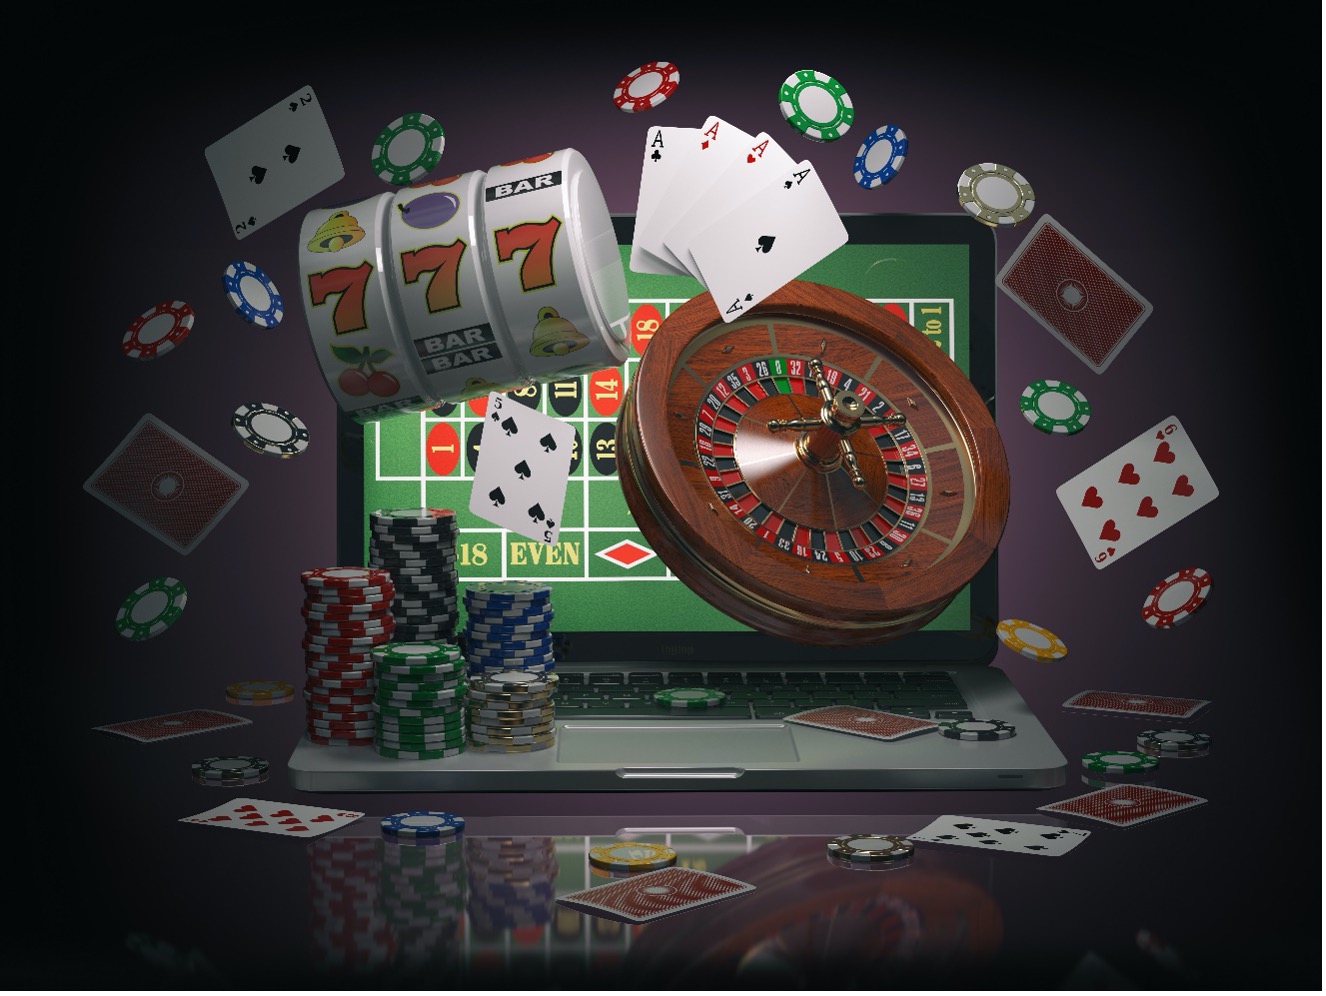 Top 5 reasons live casino is the future of online gaming